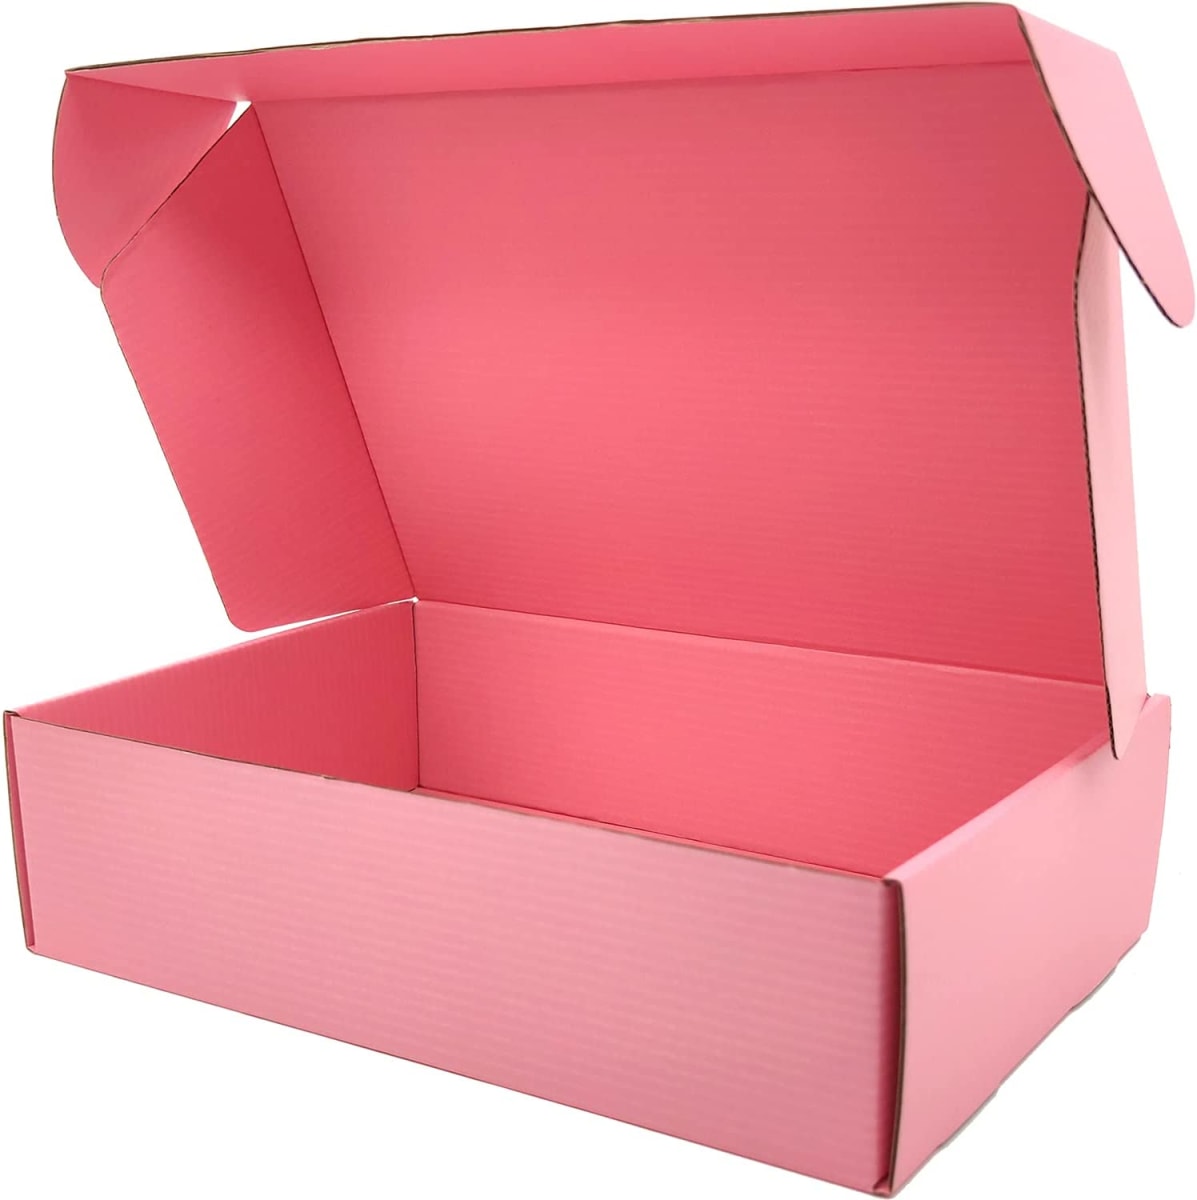 Shipping Boxes for Small Business Pack of 25 - 12x8x3 inches Cardboard Corrugated Mailer Boxes for Shipping Packaging Craft Gifts Giving Products